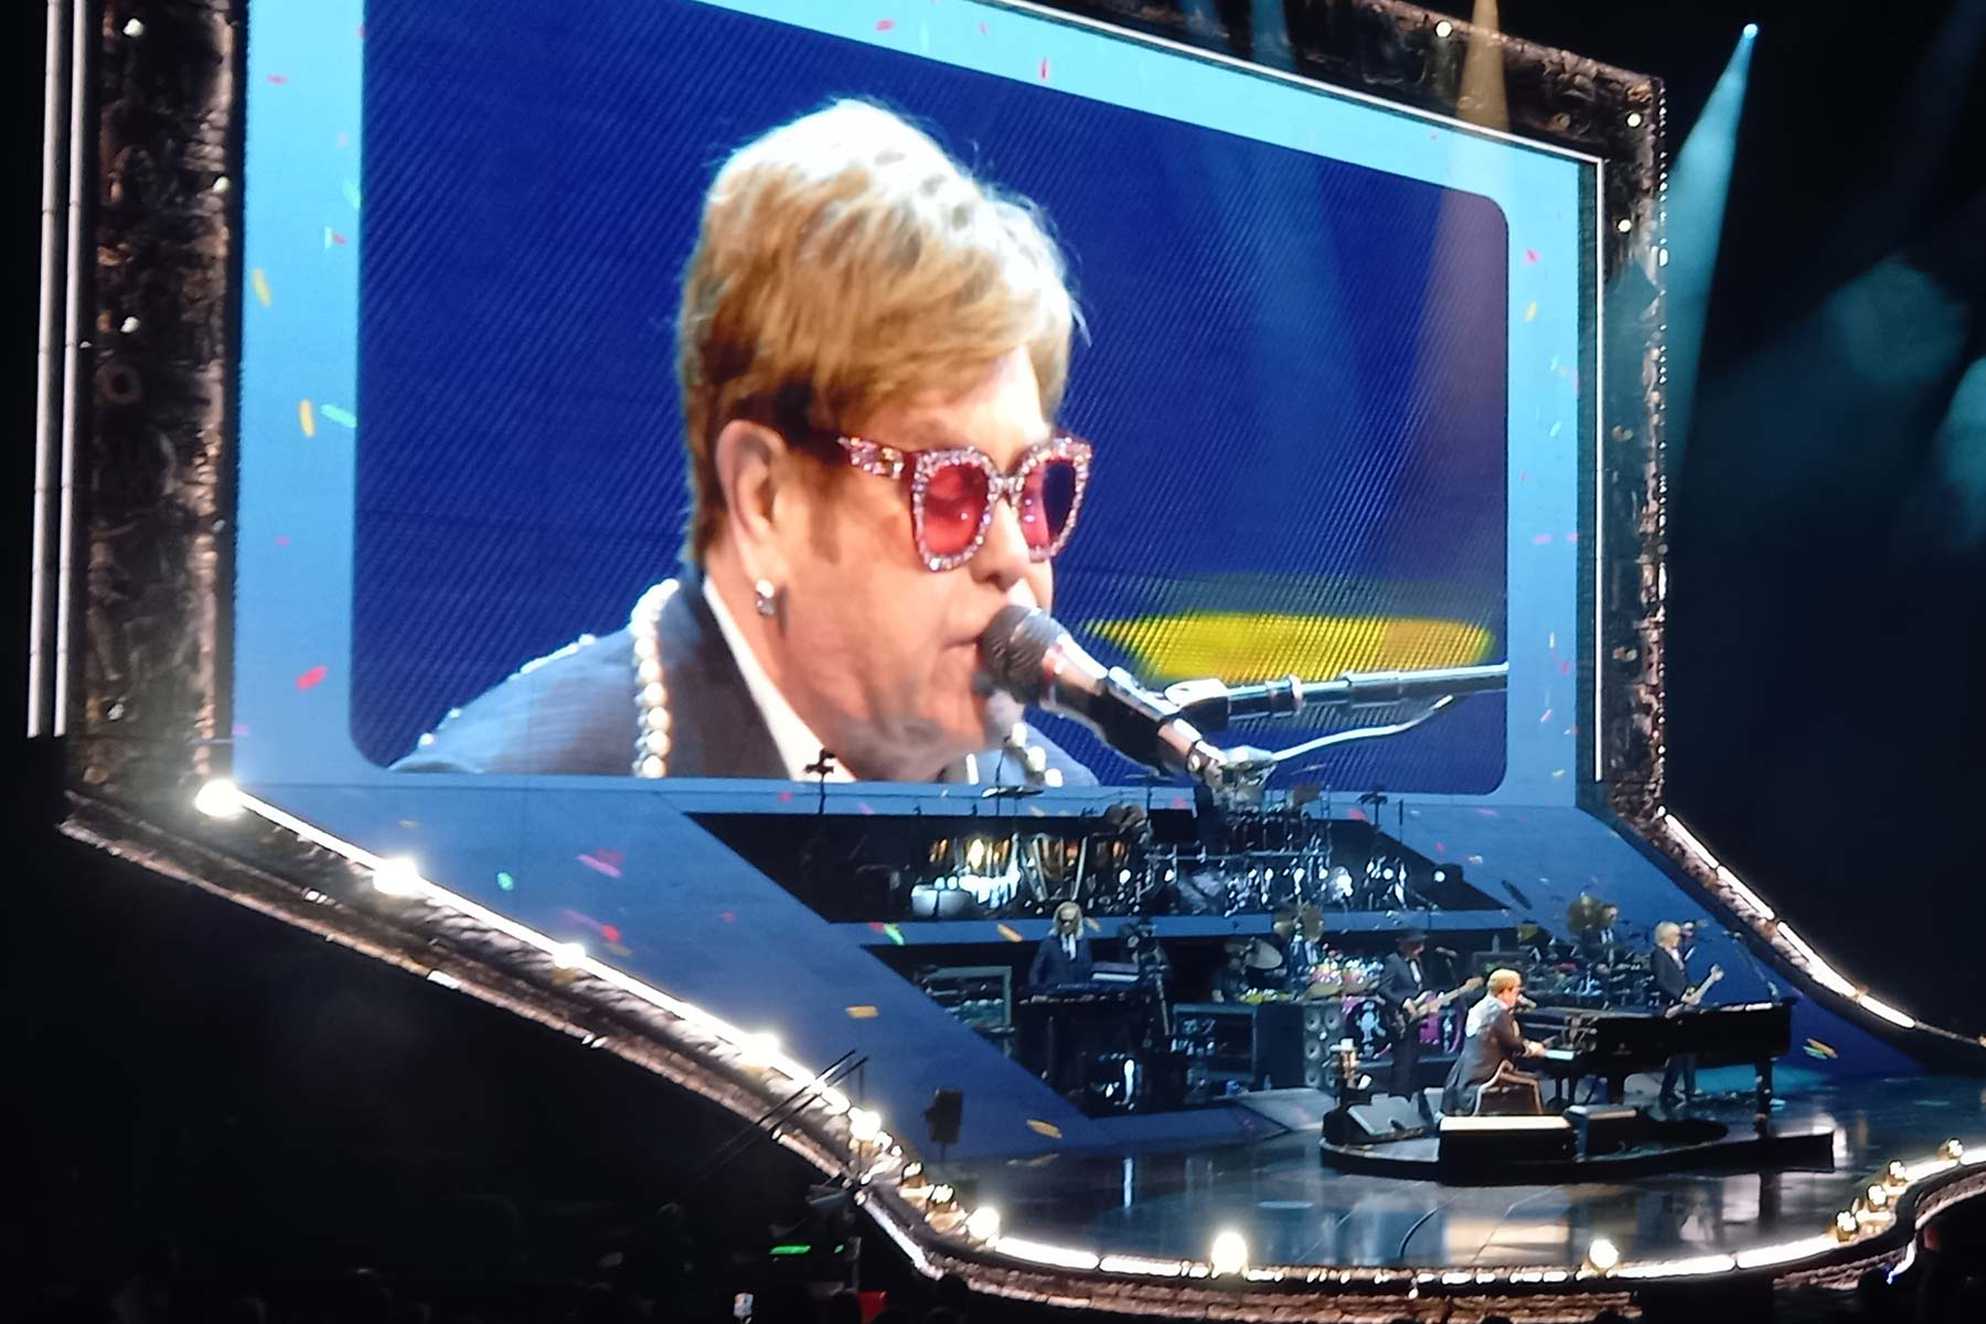 Oliver had a great view of Elton John playing the piano.